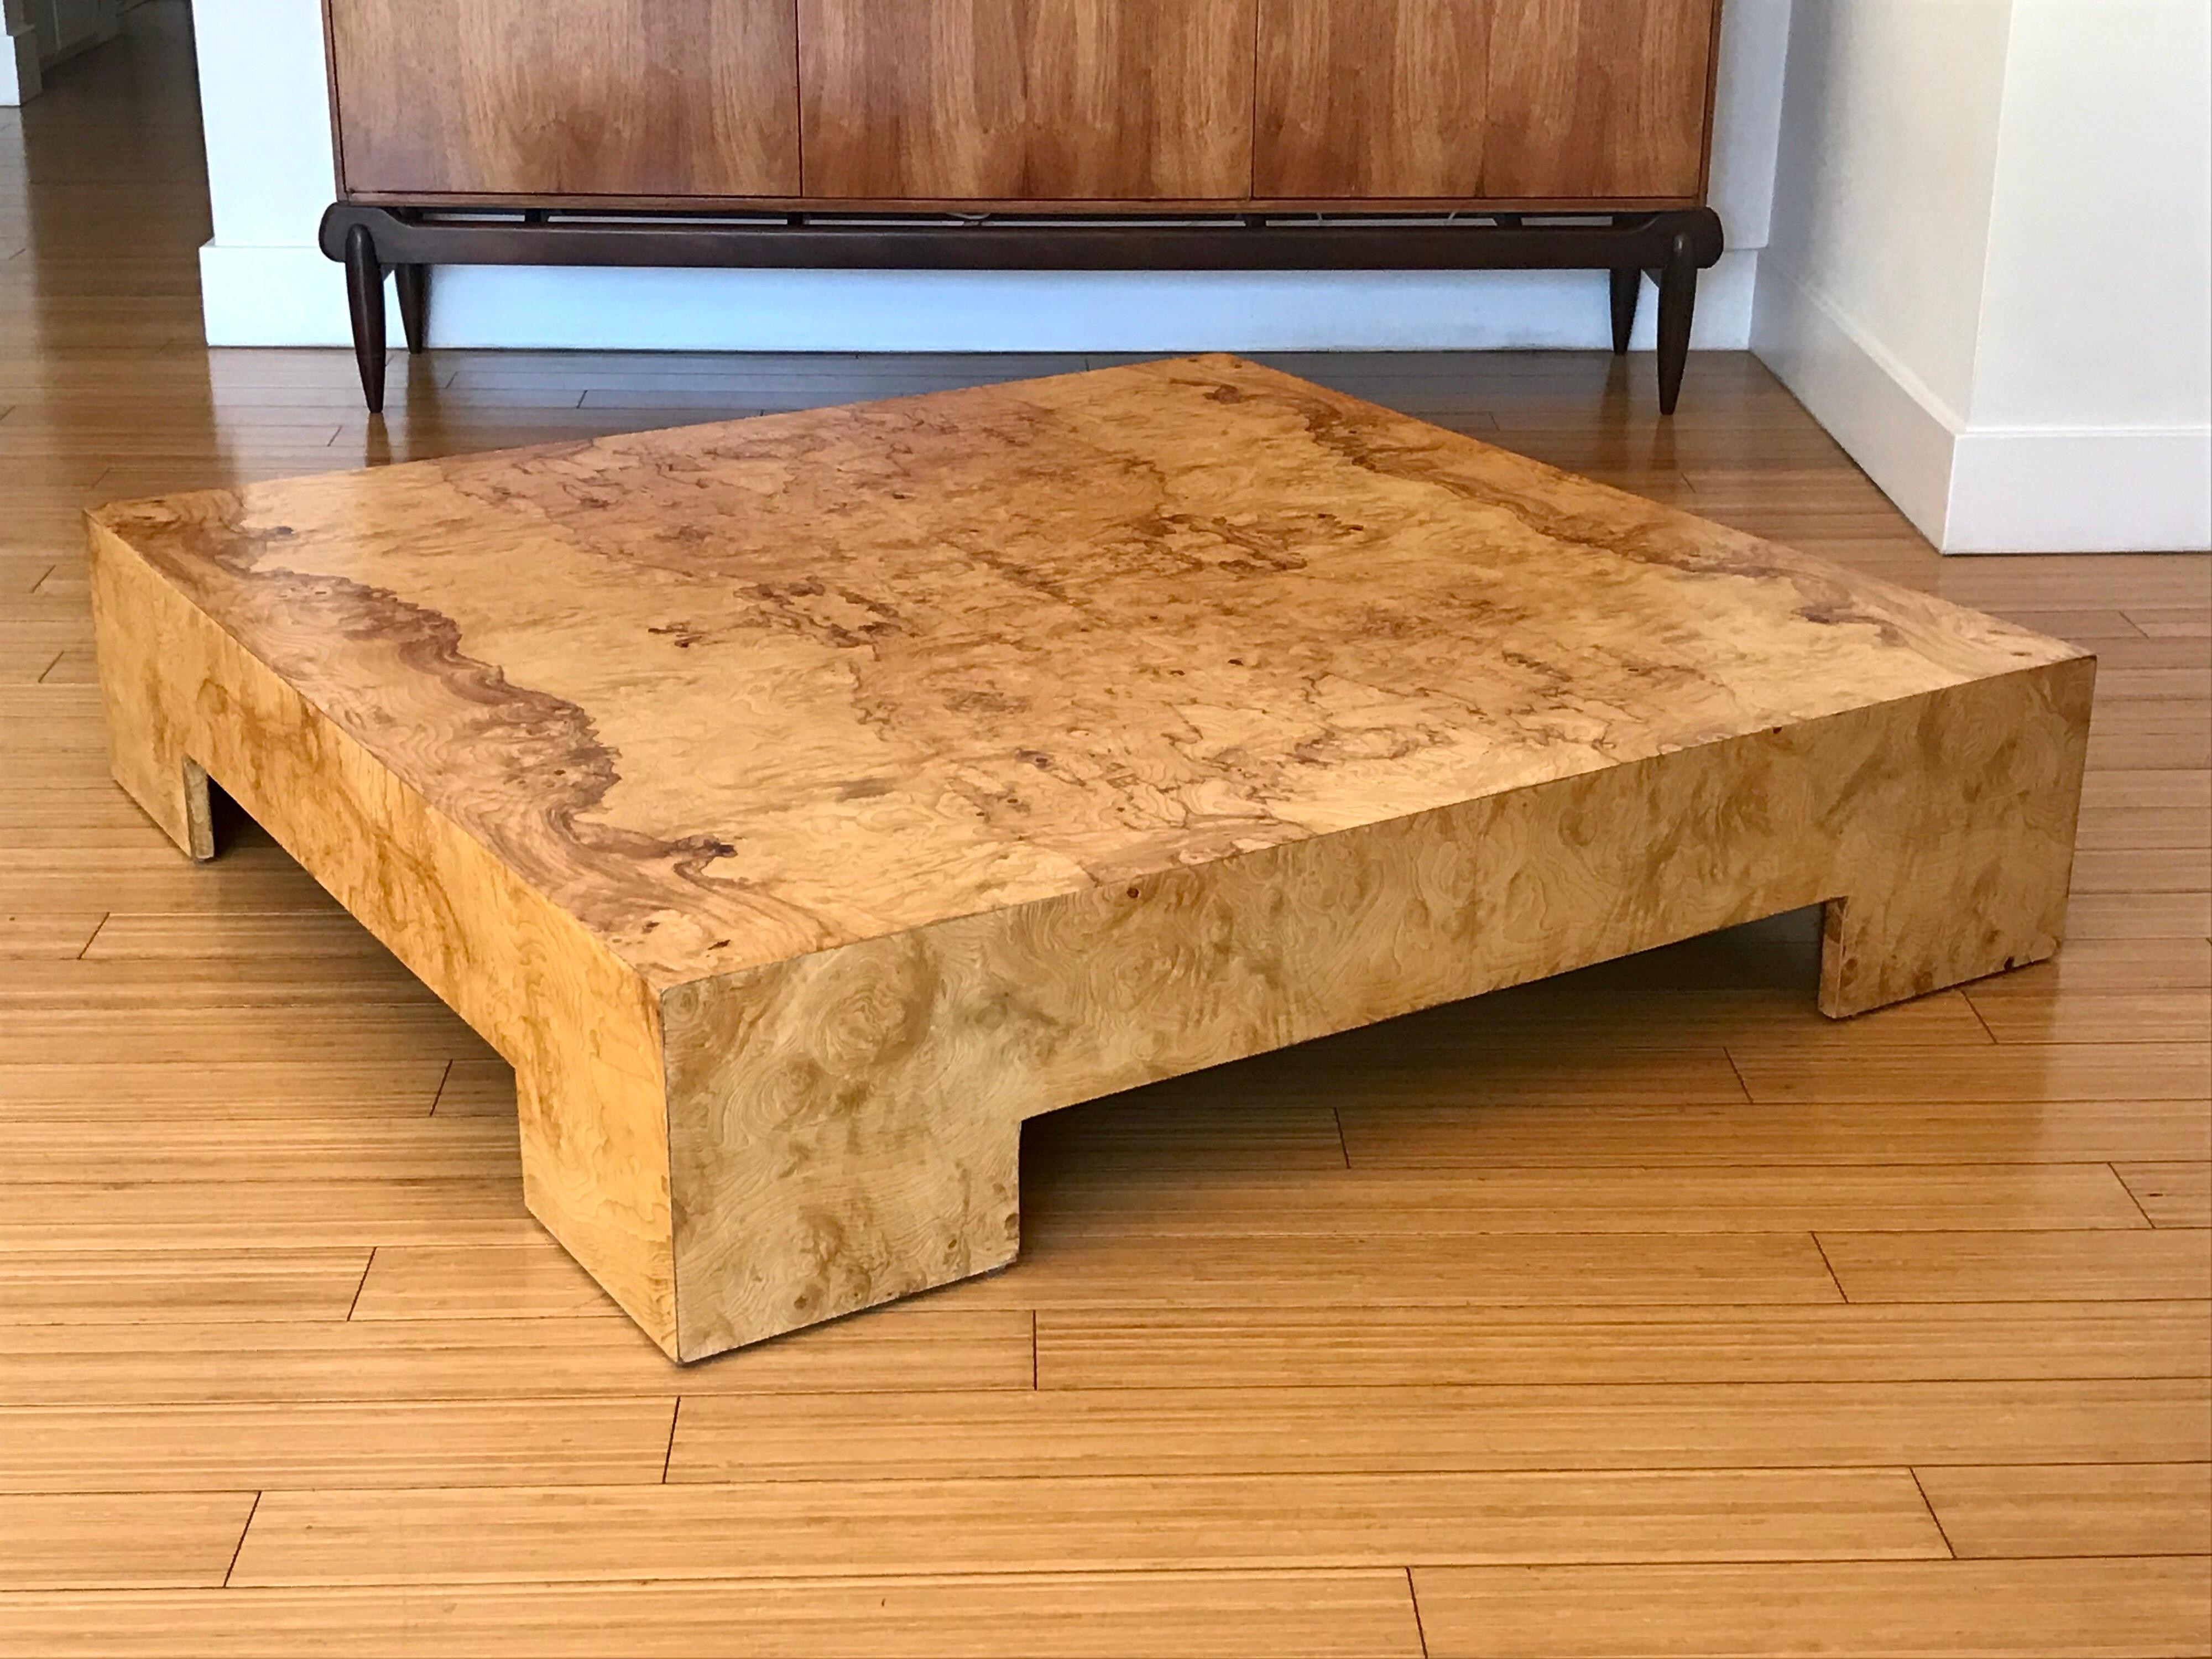 A timeless and humble design.
Manufactured by Thayer-Goggin.
Made with plywood (no press-board) construction with a wonderfully grained burl wood veneer.
It has a great scale for lots of books and can even be sat on. It's solid and sturdy.